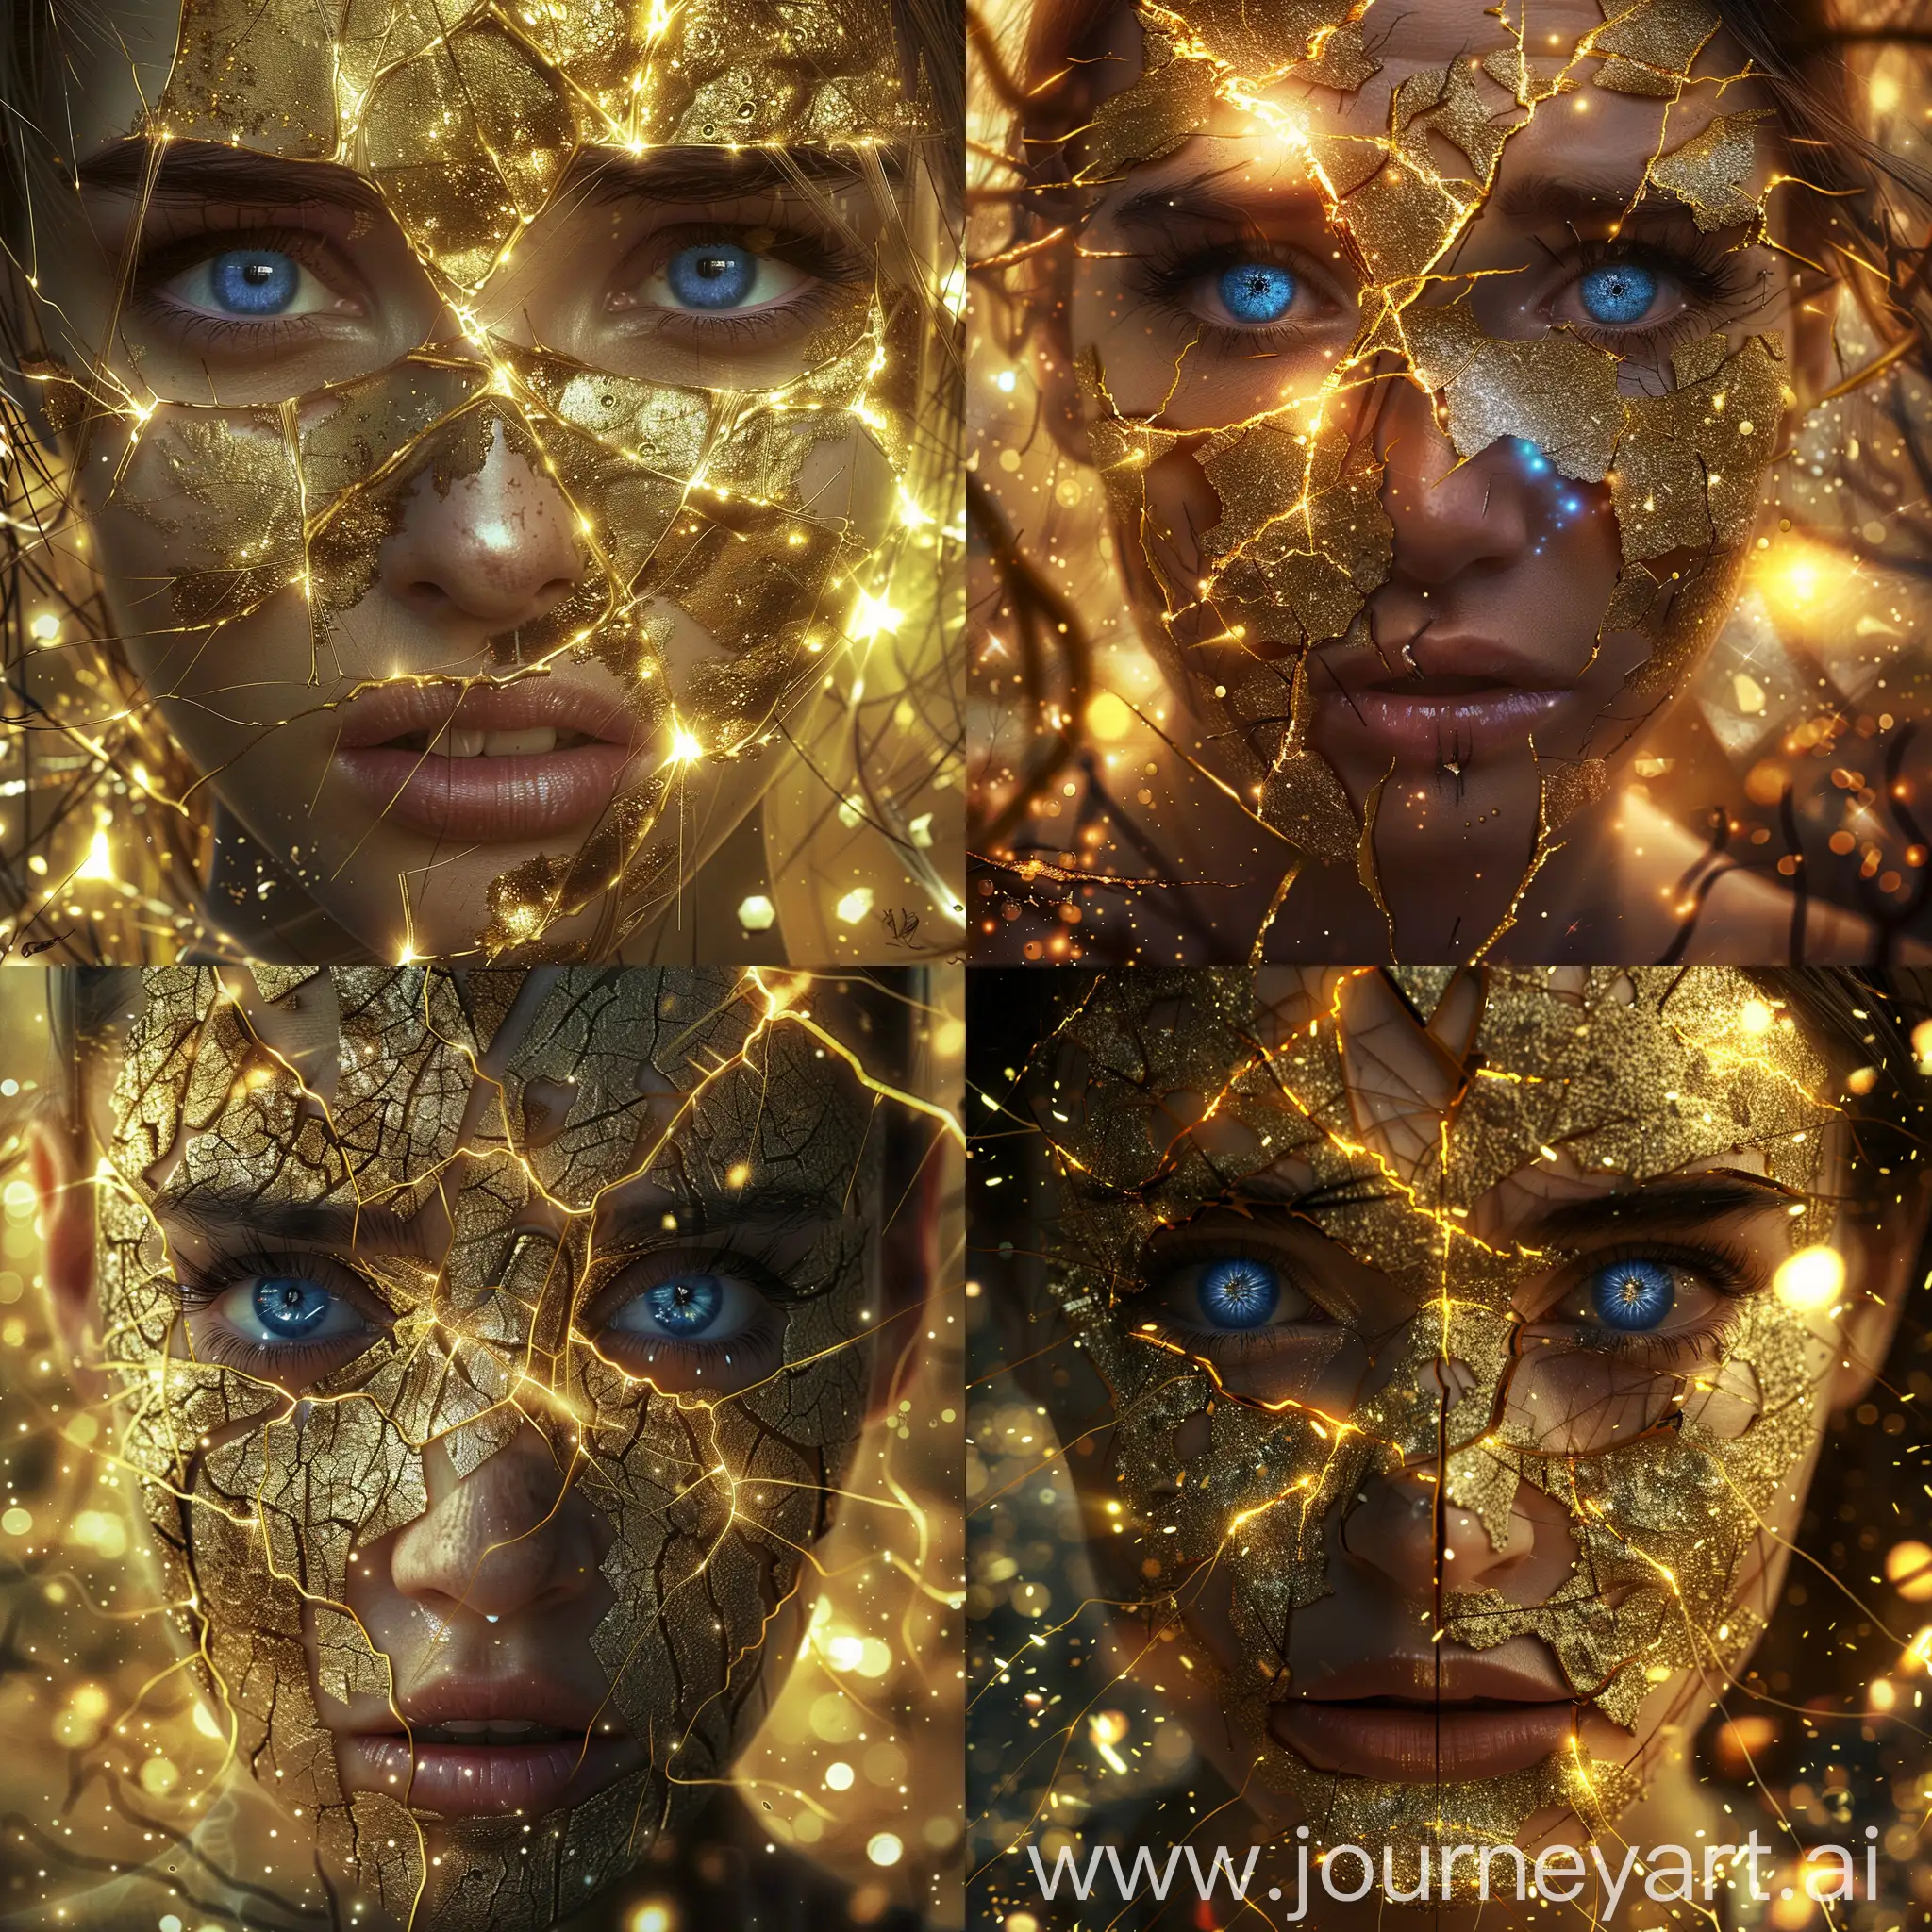 Surreal-Beauty-Woman-with-Cracked-Face-and-Golden-Repairs